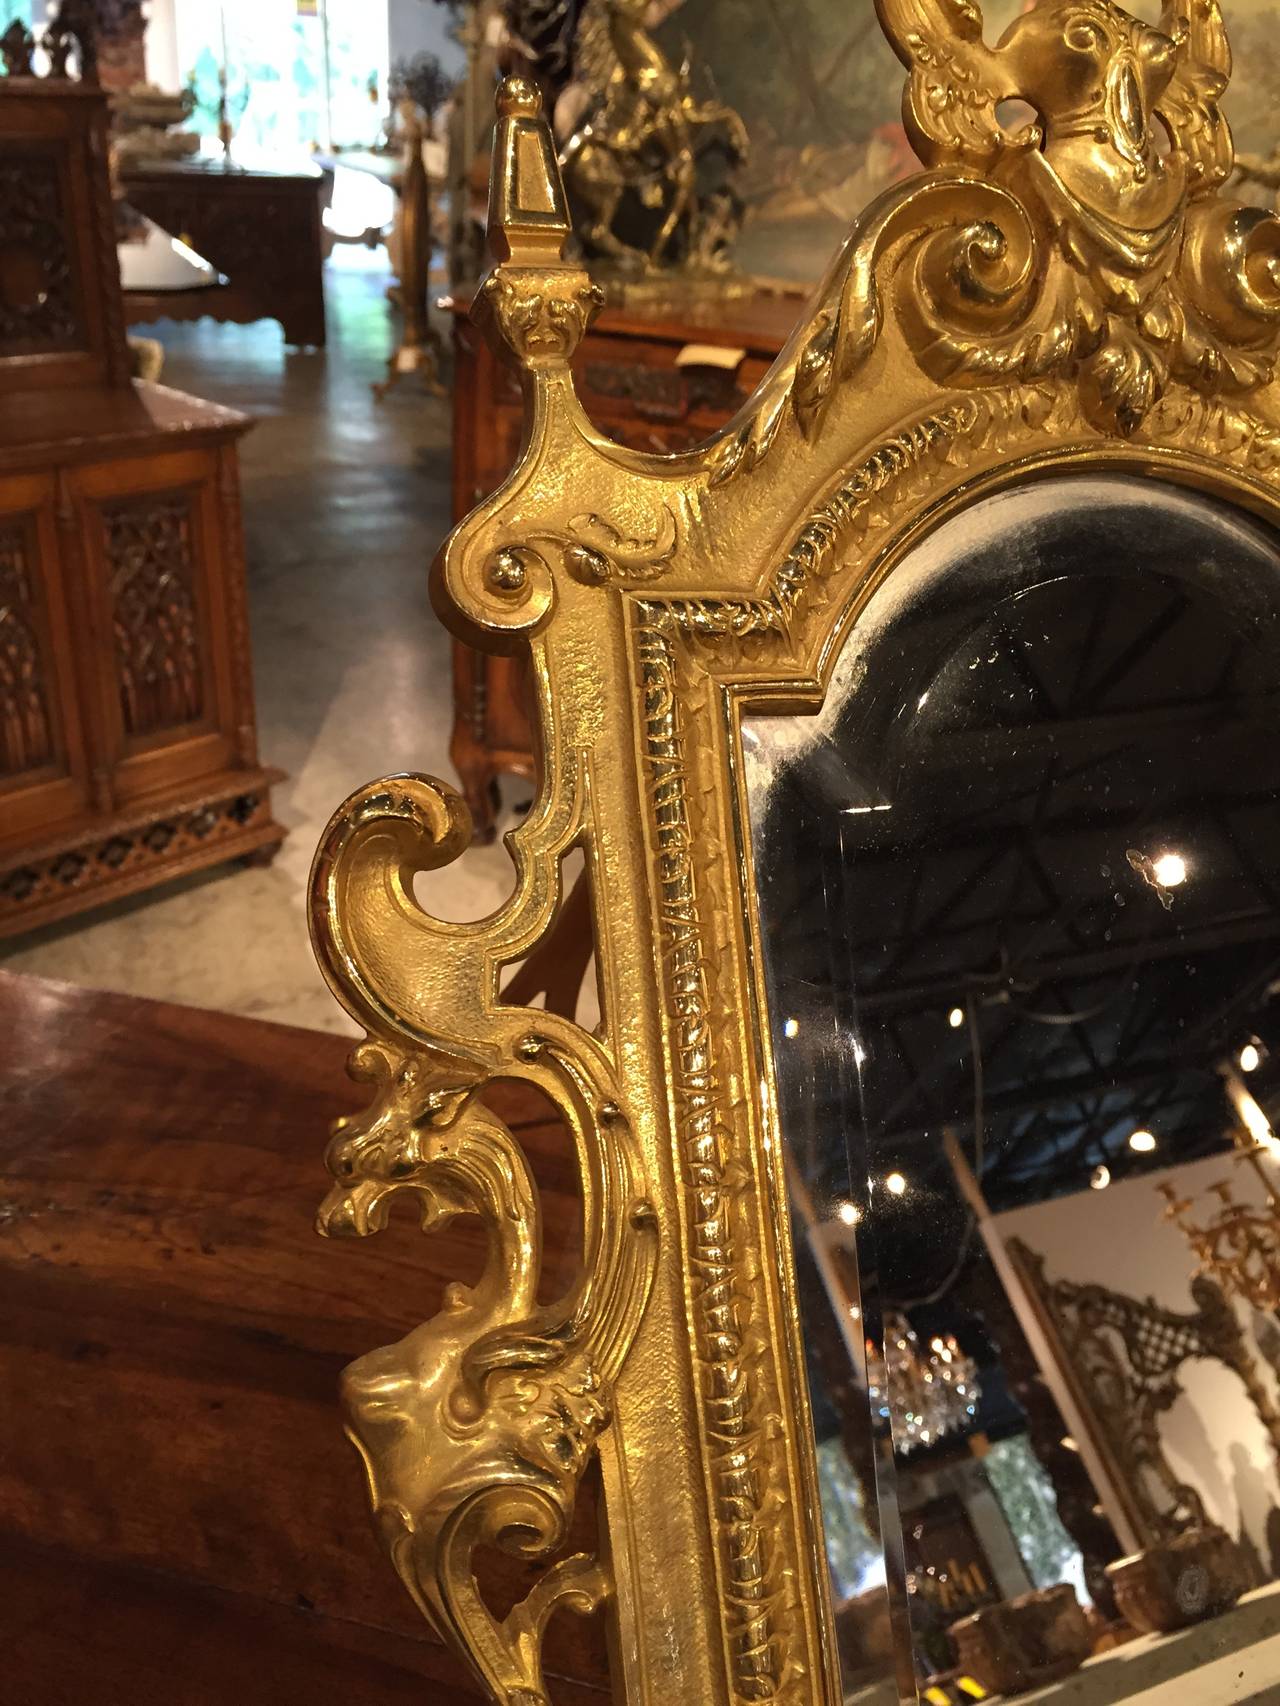 19th Century Antique Bronze Table Mirror from France, Period Napoleon III